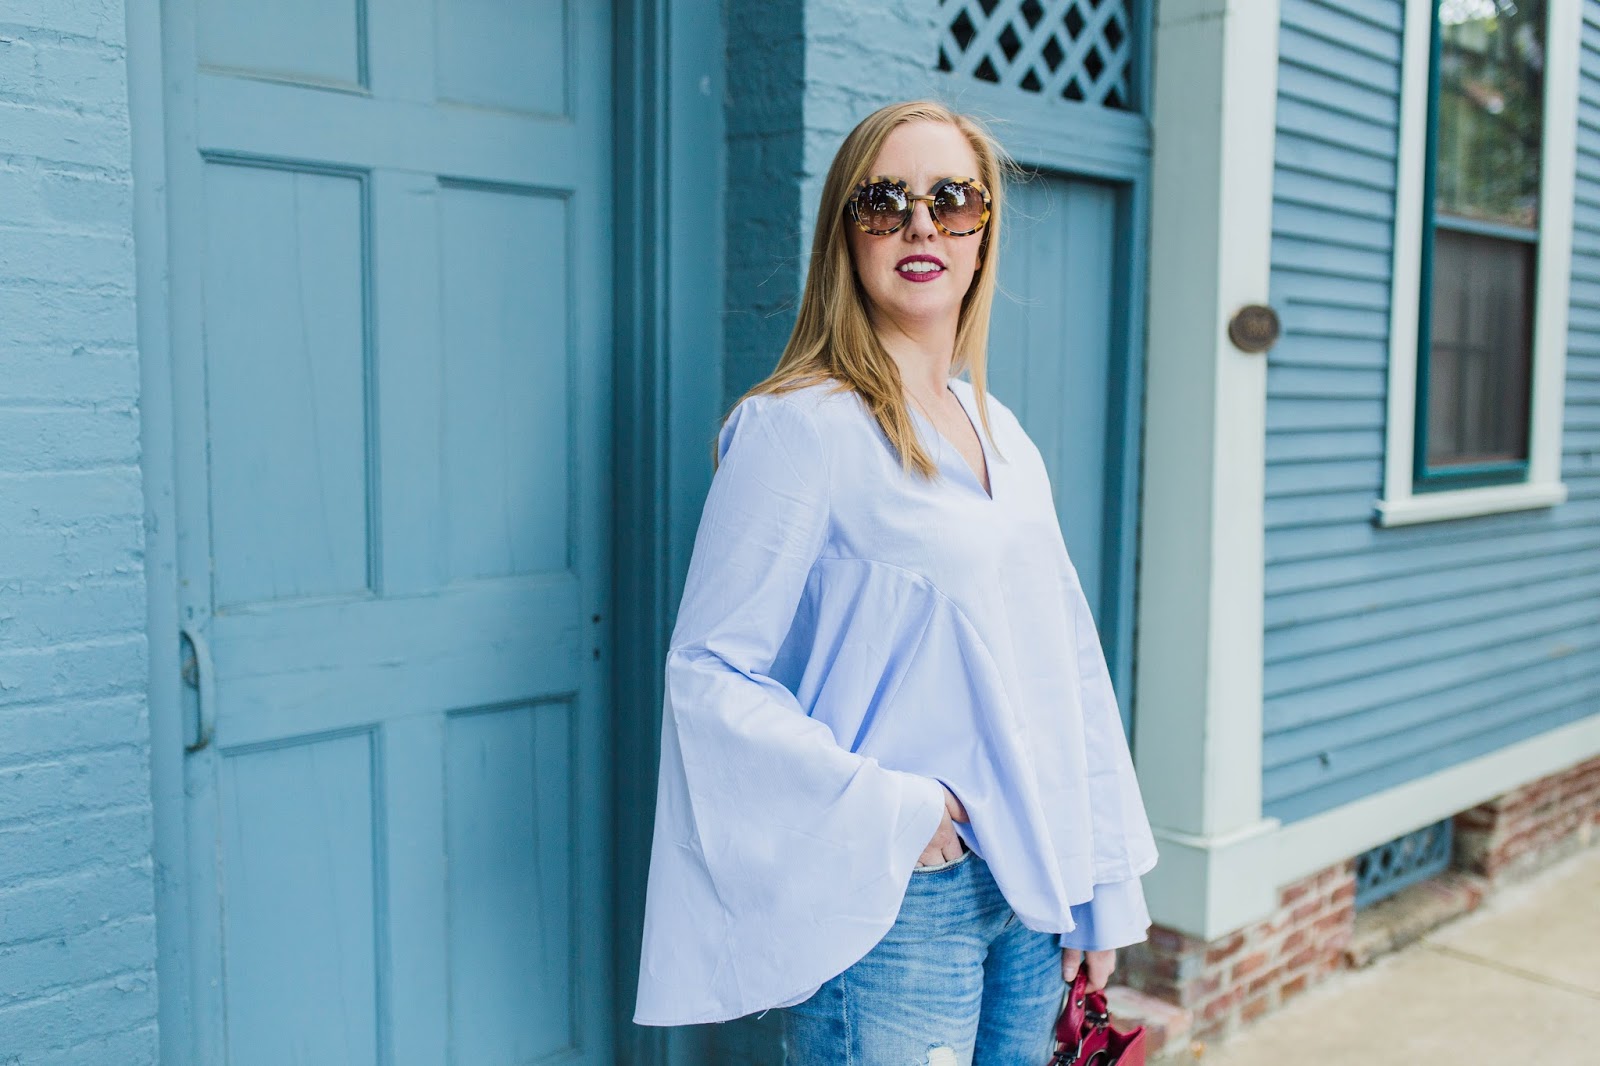 charlestown fashion blogger, lcs studios, boston style blogger, on the blog, bell sleeve top, shopbop bell sleeve